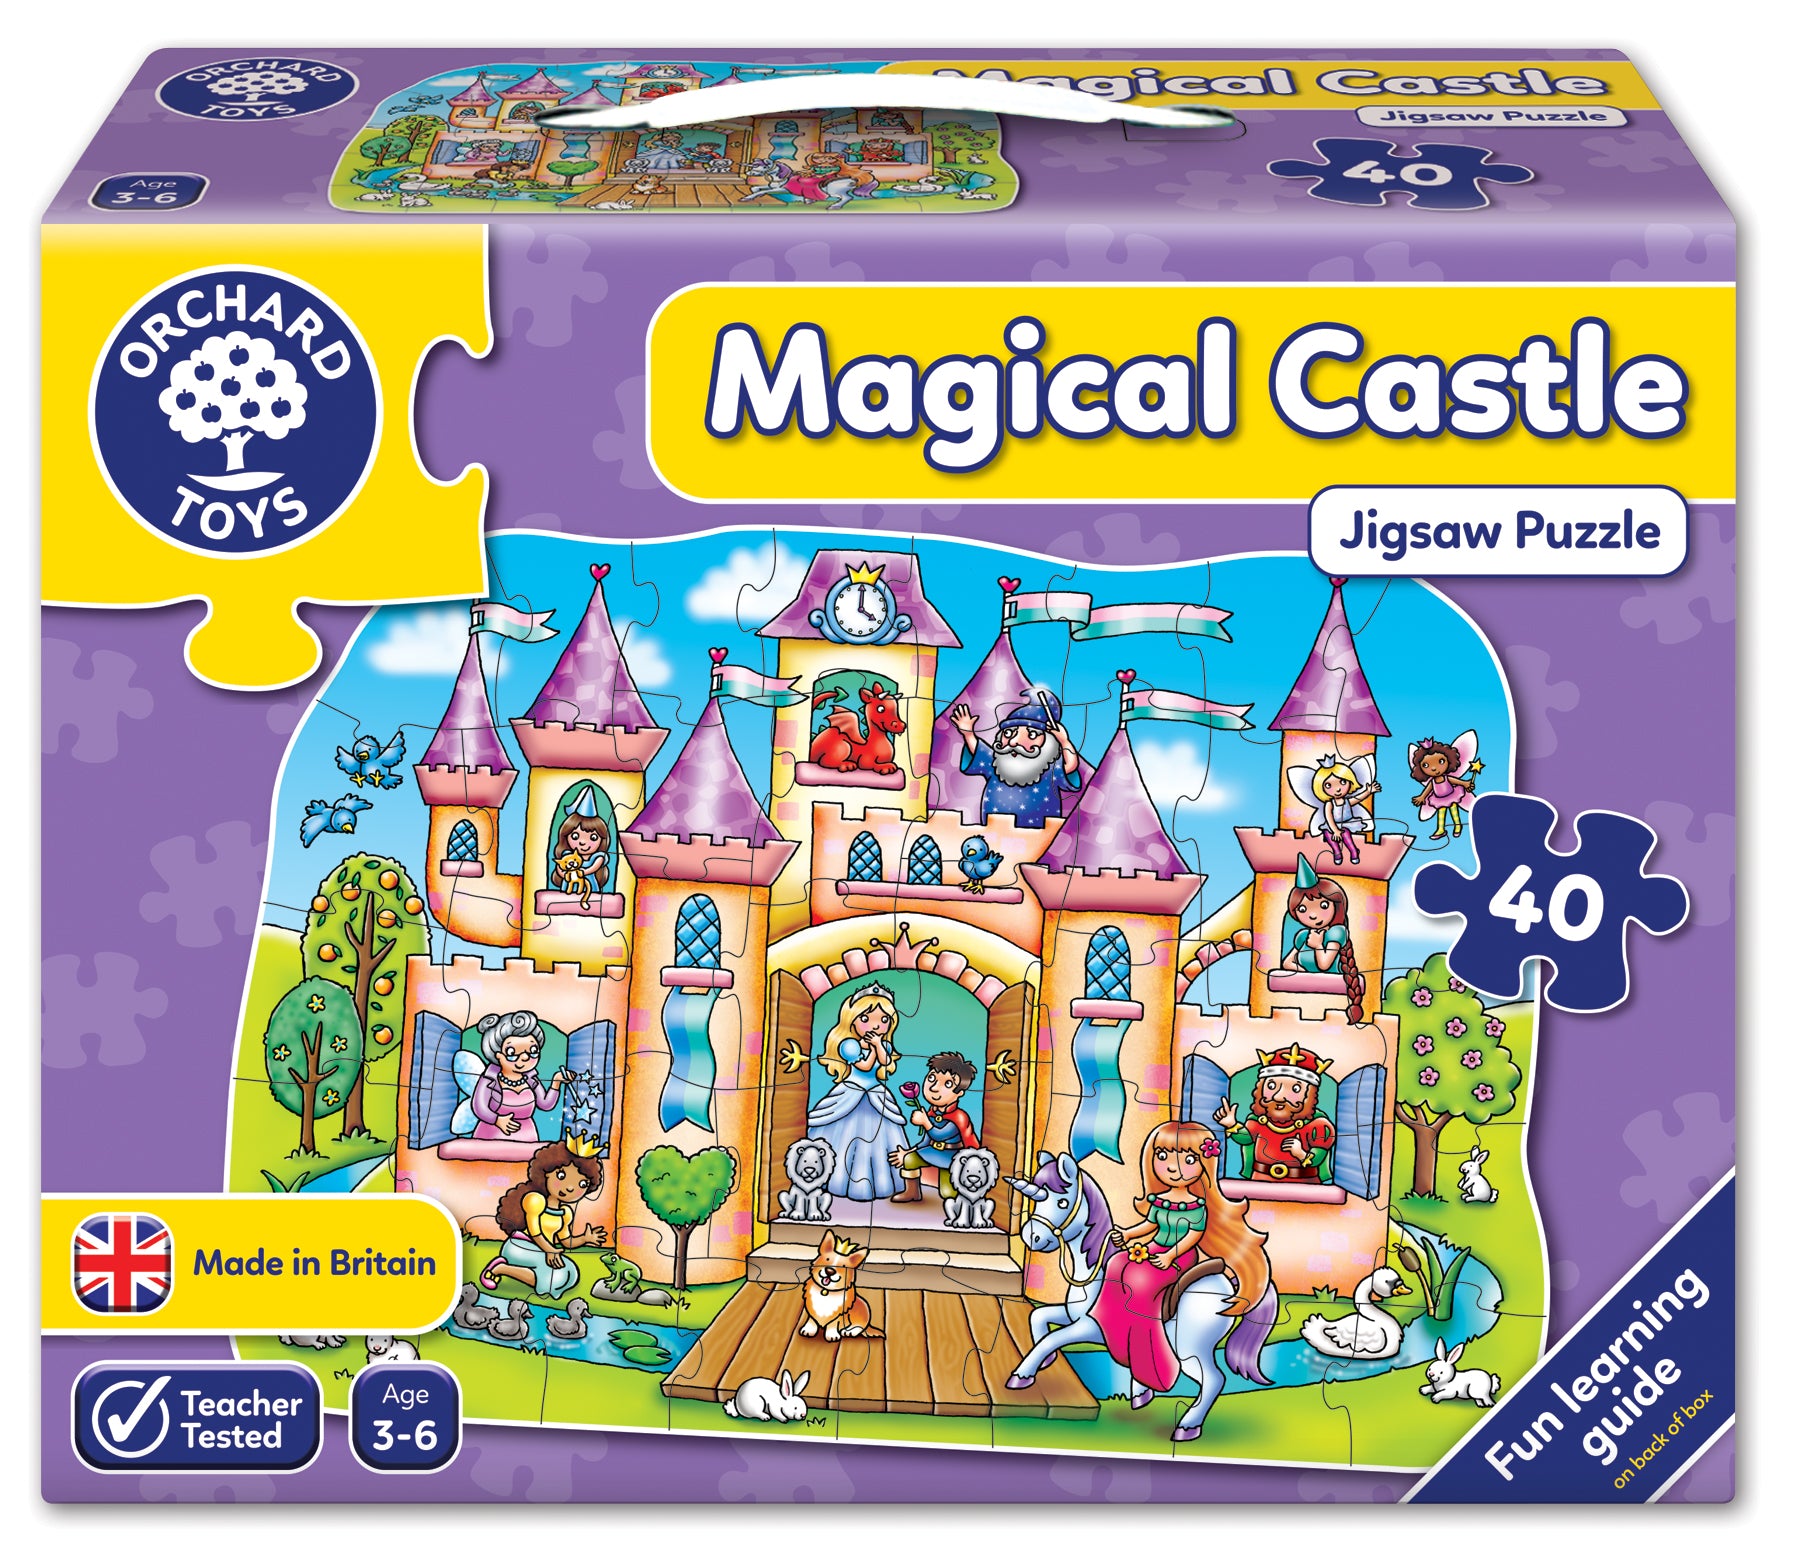 Orchard Magical Castle